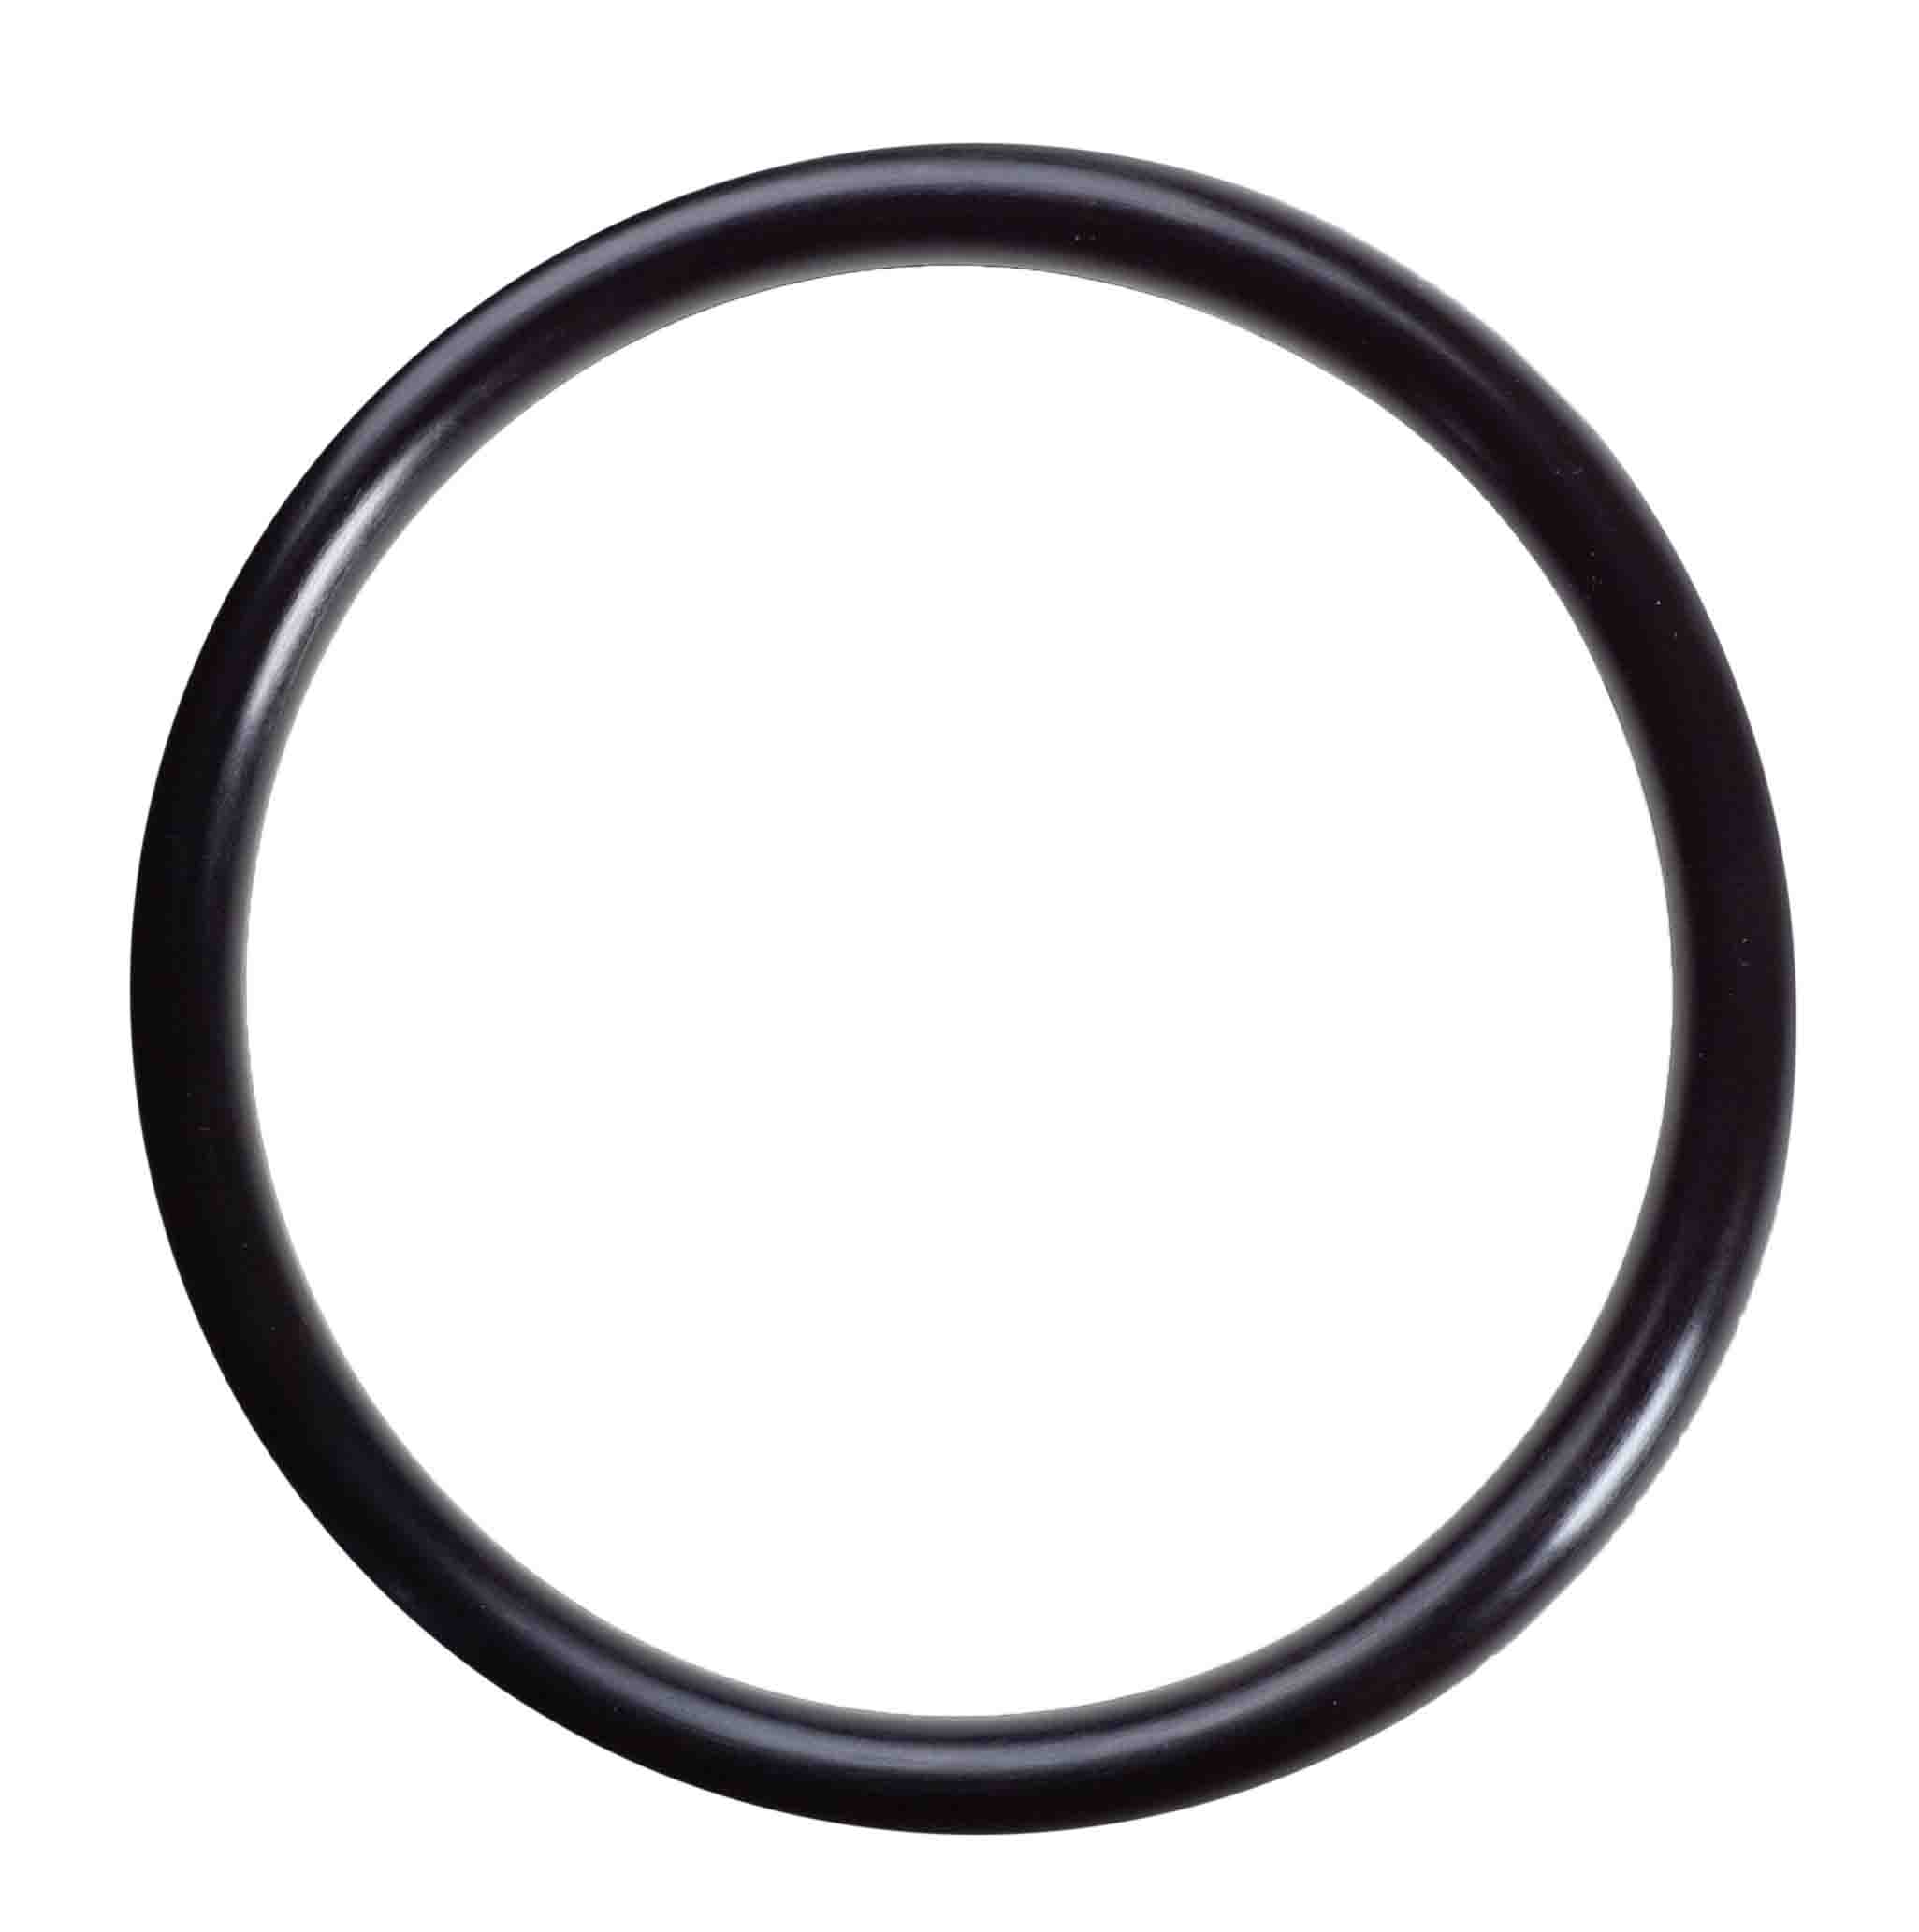 06808 LS Housing O-rings for Nanopure II system